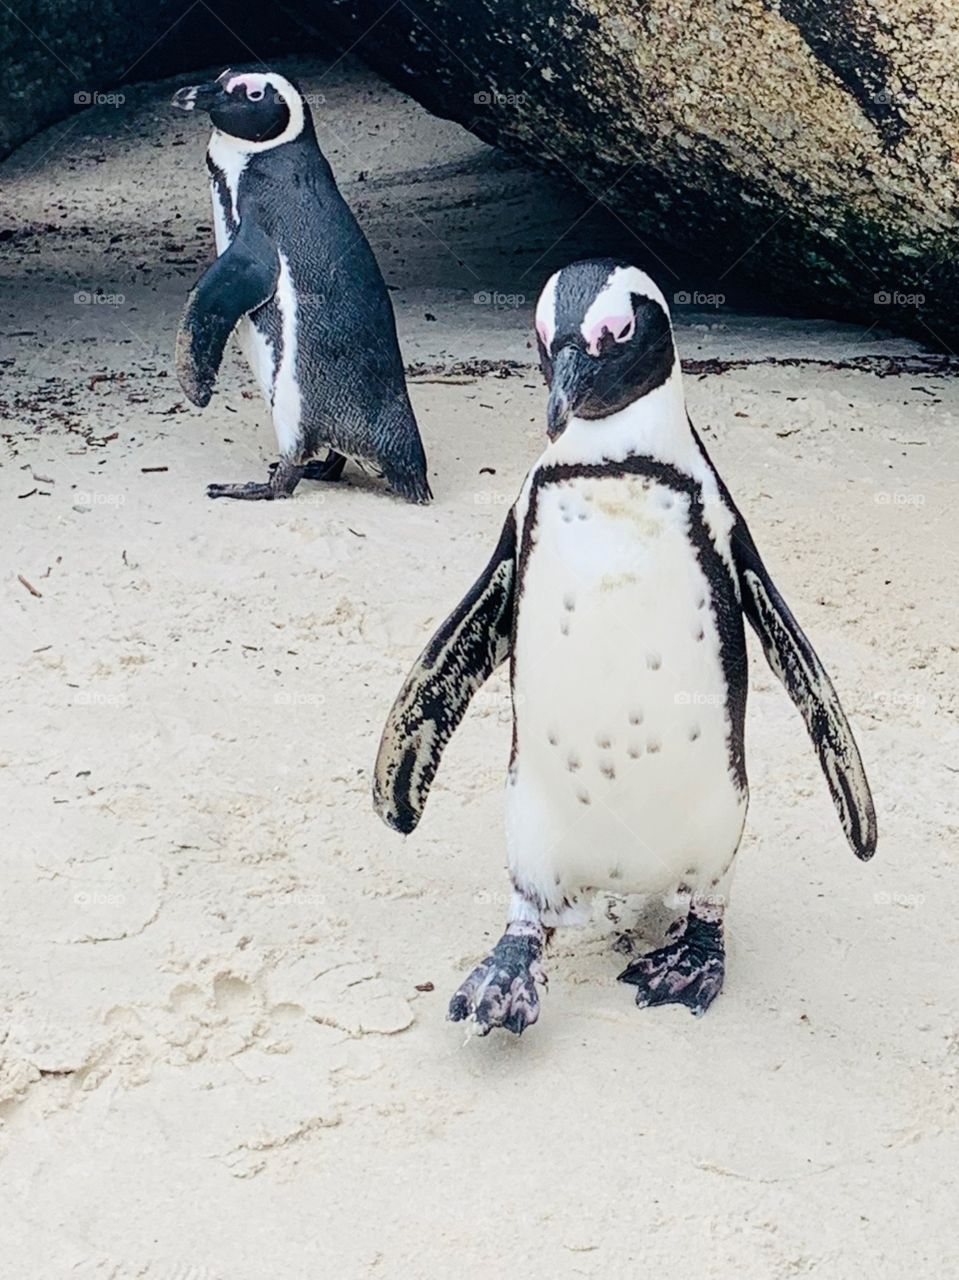 ‘Dancing.. it’s like singing.. with your body’ - quote from ‘Happy Feet’. Penguins have the rhythm 😊